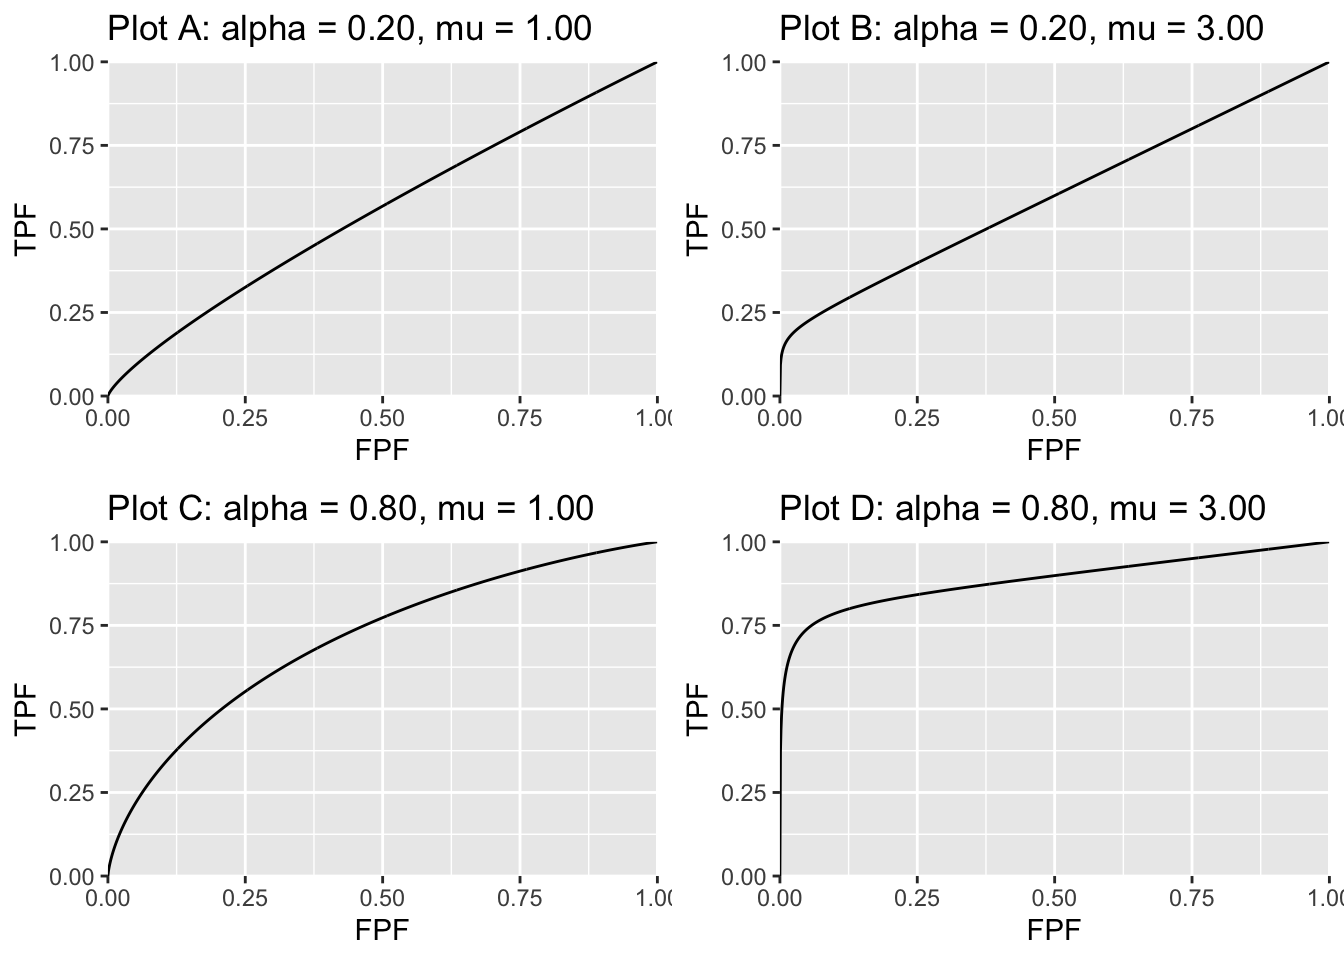 ROC curves predicted by the CBM model. The corresponding values of the parameters are indicated above the plots. For small $\alpha$ or small $\mu$ the curve approaches the chance diagonal, consistent with the notion that if the lesion is not visible, performance can be no better than chance level.